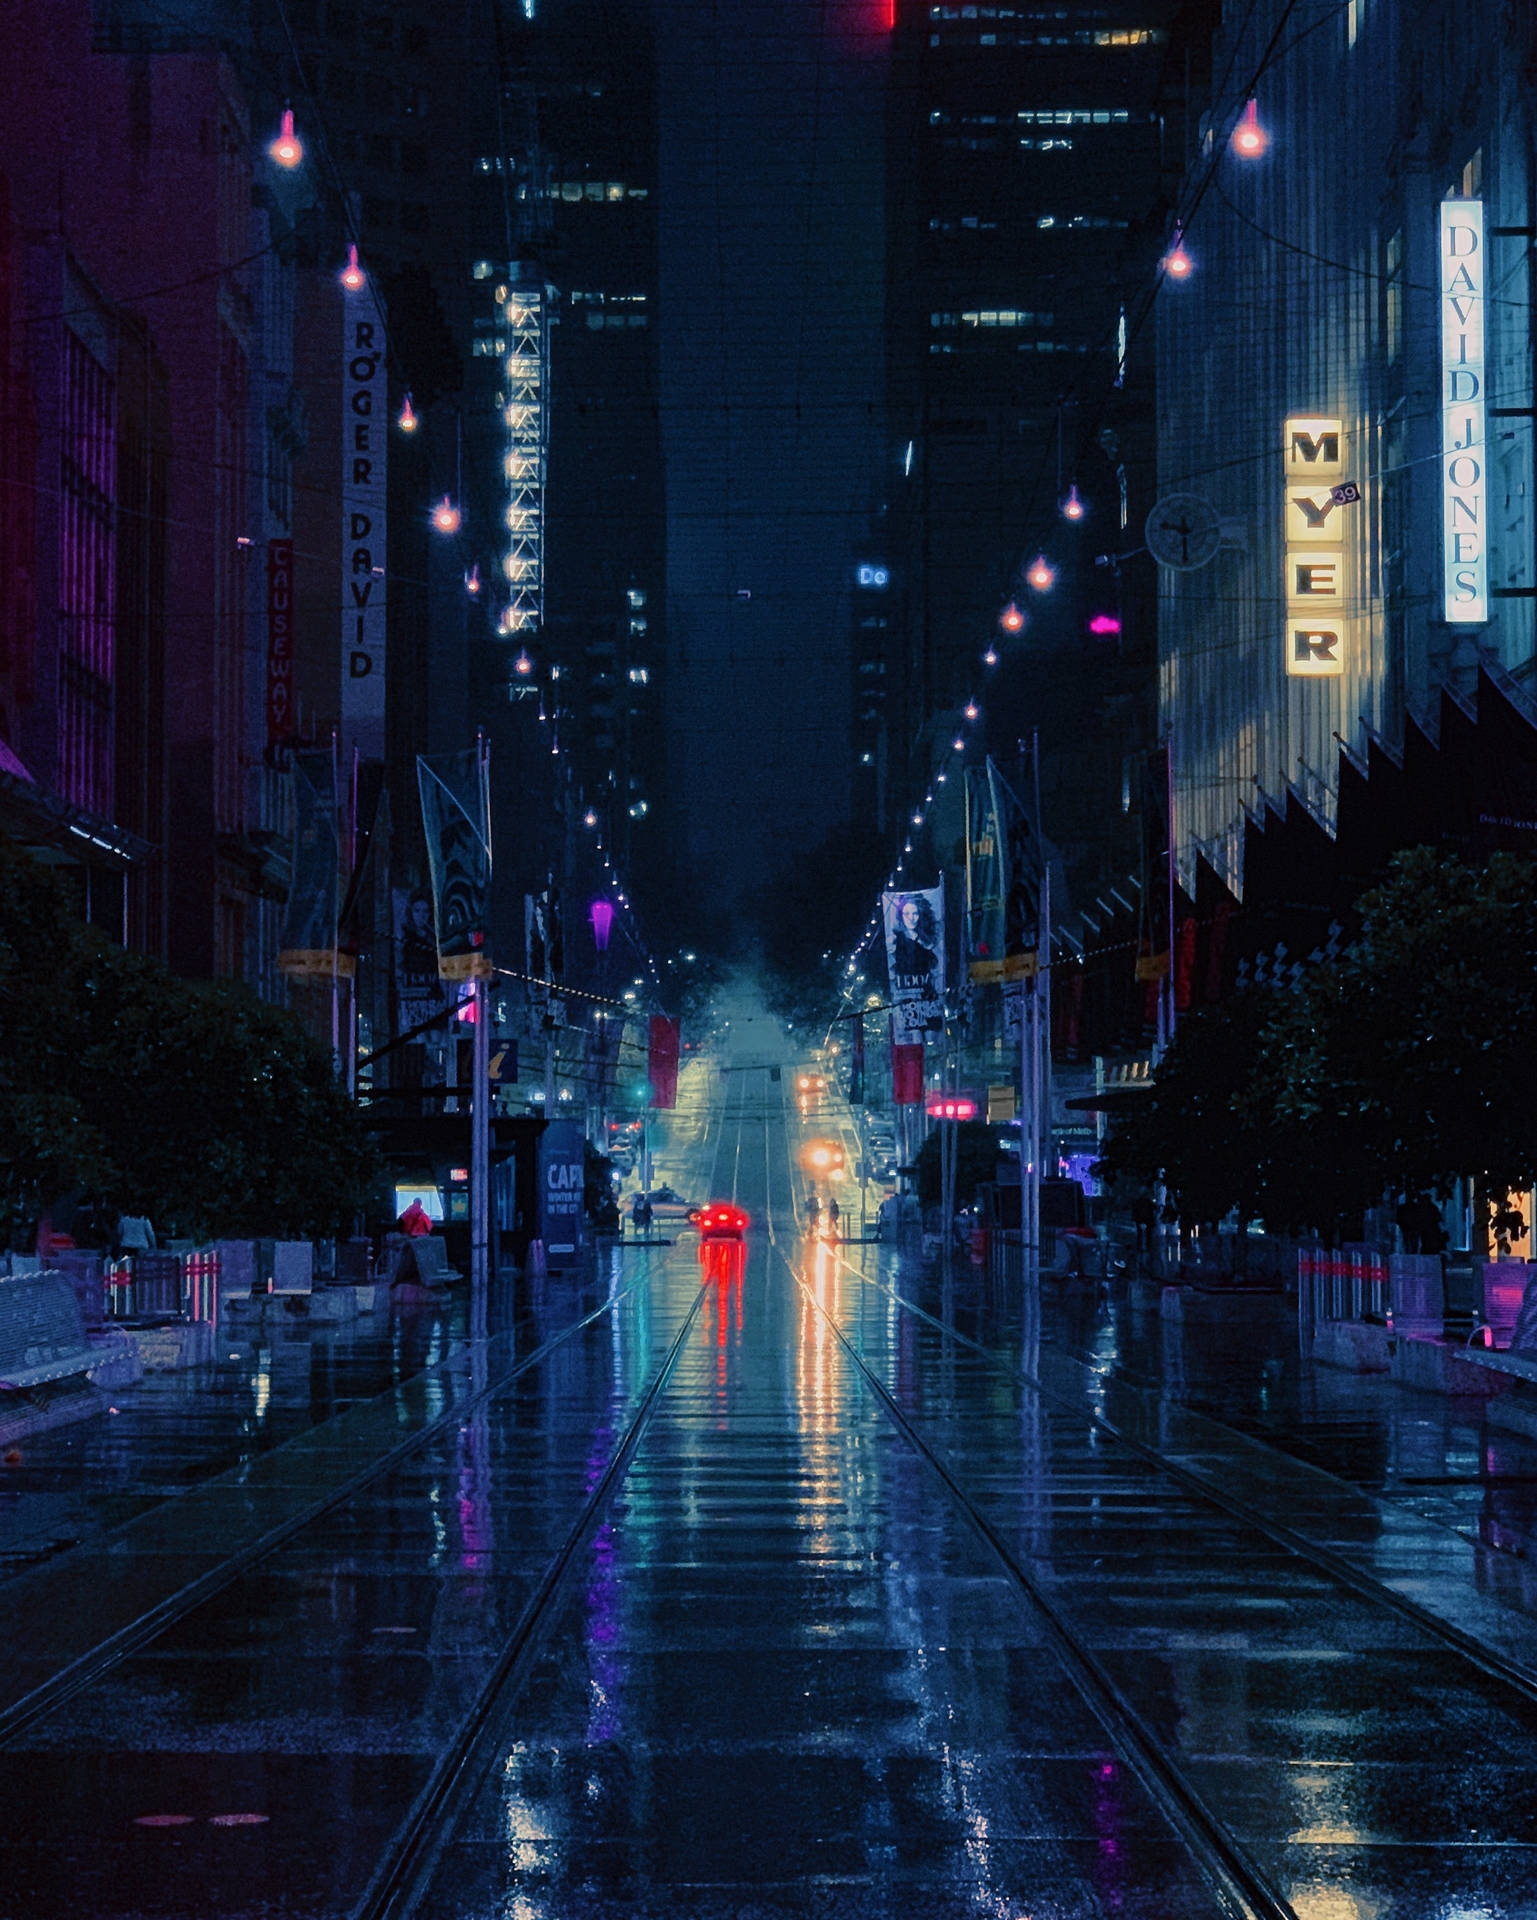 Night, City, Cyberpunk wallpaper - Coolwallpapers.me!